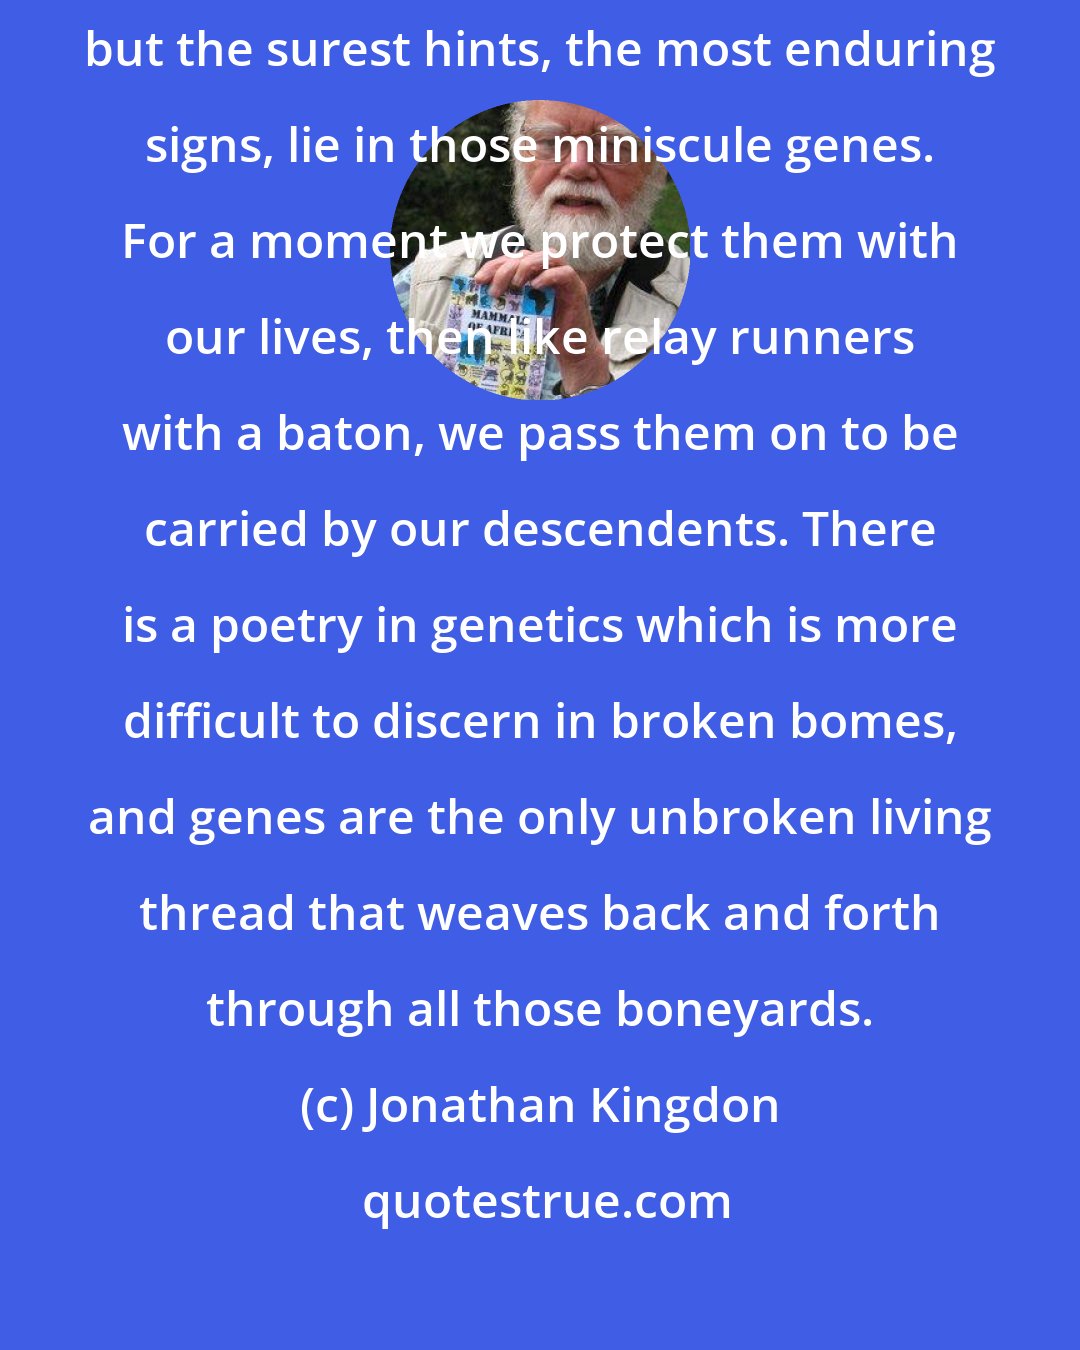 Jonathan Kingdon: Fossil bones and footsteps and ruined homes are the solid facts of history, but the surest hints, the most enduring signs, lie in those miniscule genes. For a moment we protect them with our lives, then like relay runners with a baton, we pass them on to be carried by our descendents. There is a poetry in genetics which is more difficult to discern in broken bomes, and genes are the only unbroken living thread that weaves back and forth through all those boneyards.